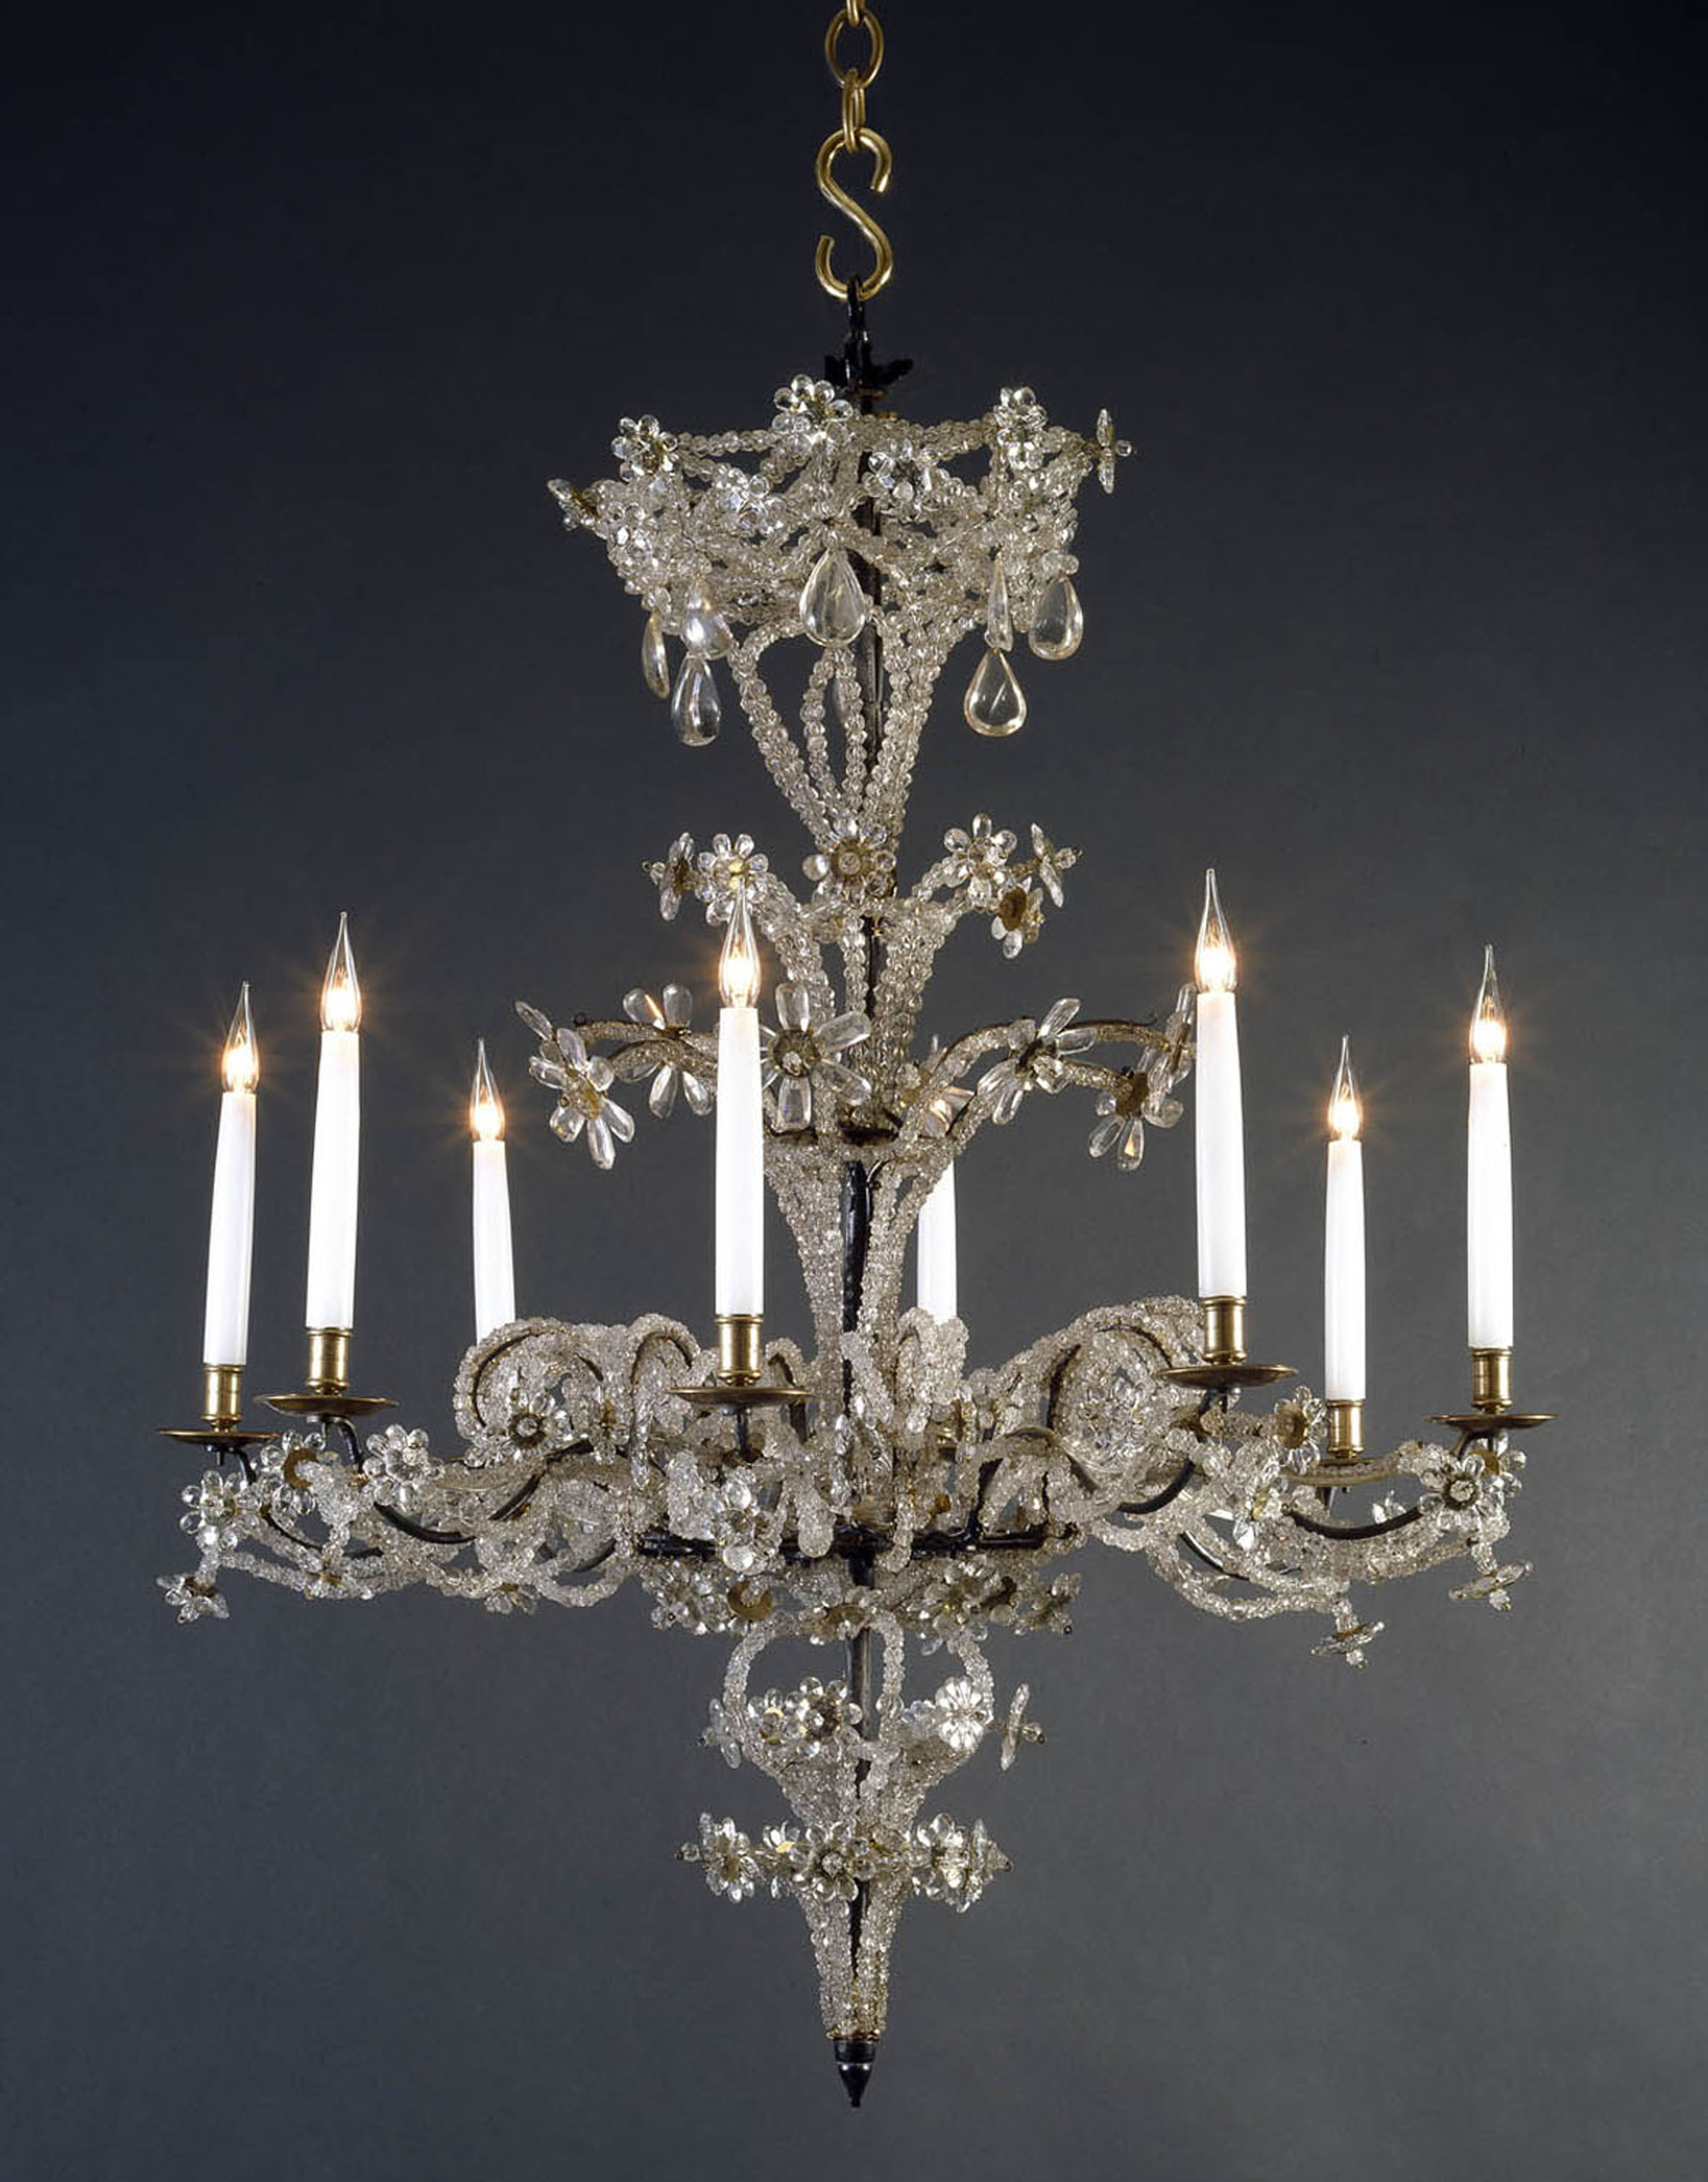 Genoese Chandelier with 8 Lights